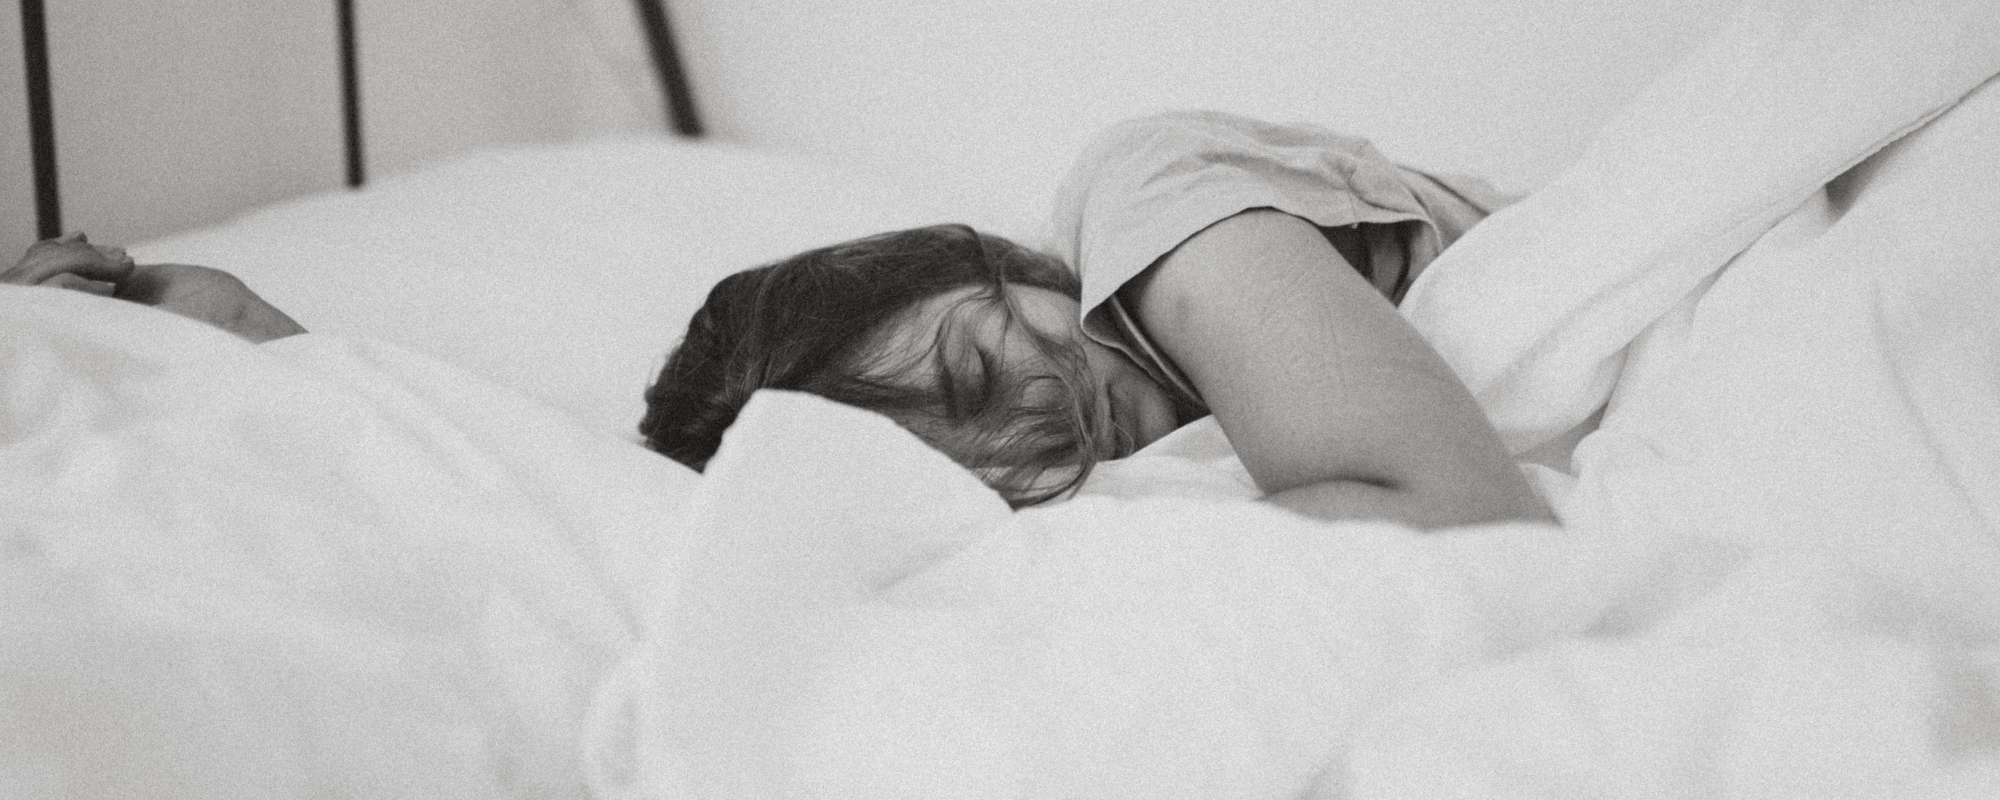 Our 50 Best Sleep Tips - Your guide to improving your sleep quality and workout recovery.